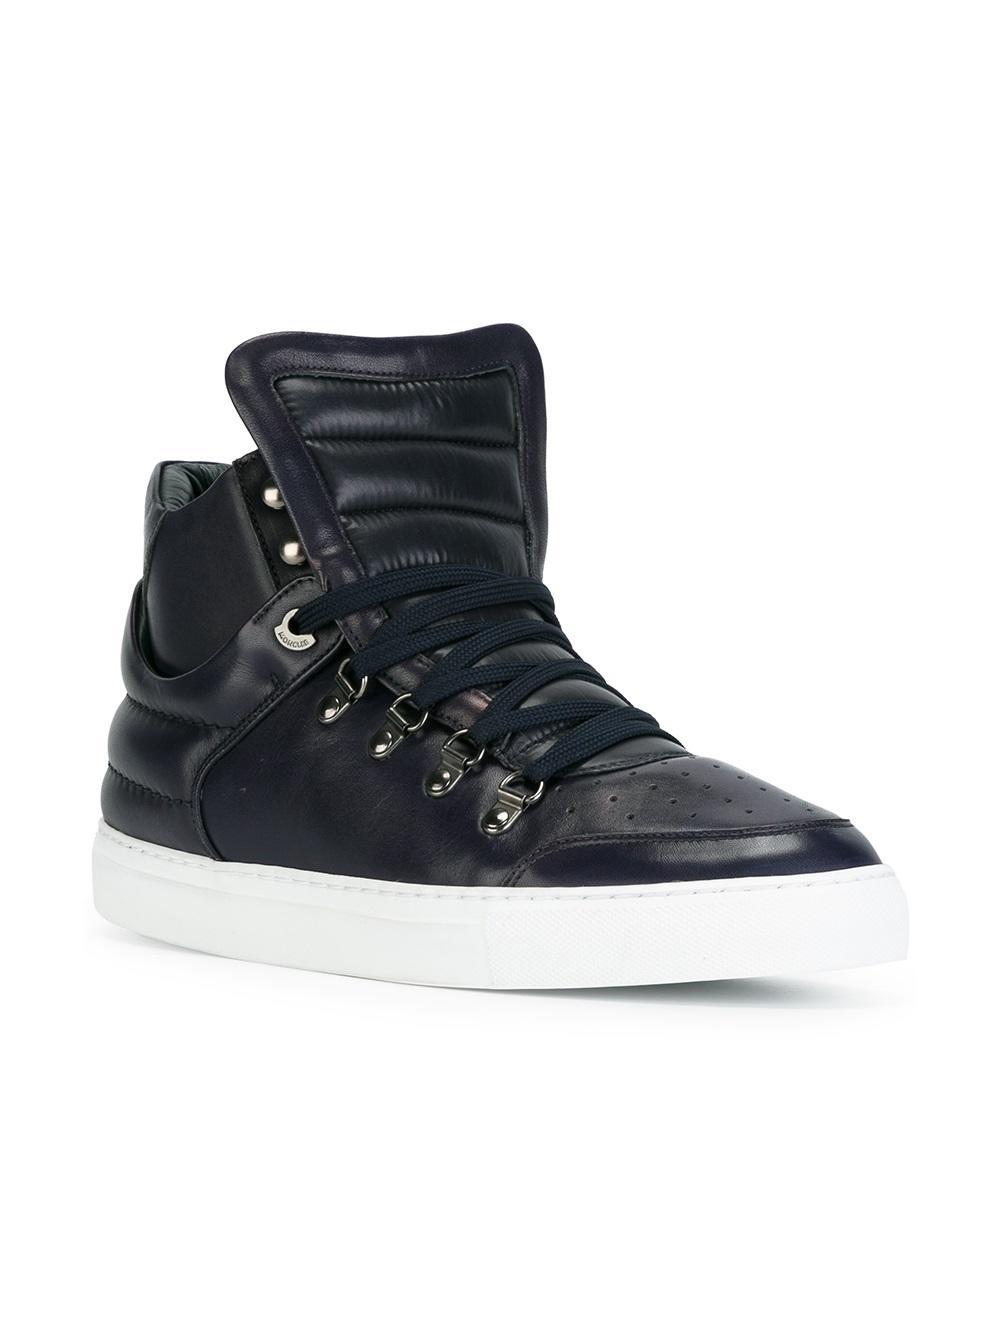 Lyst - Moncler 'jacques' Sneakers in Blue for Men